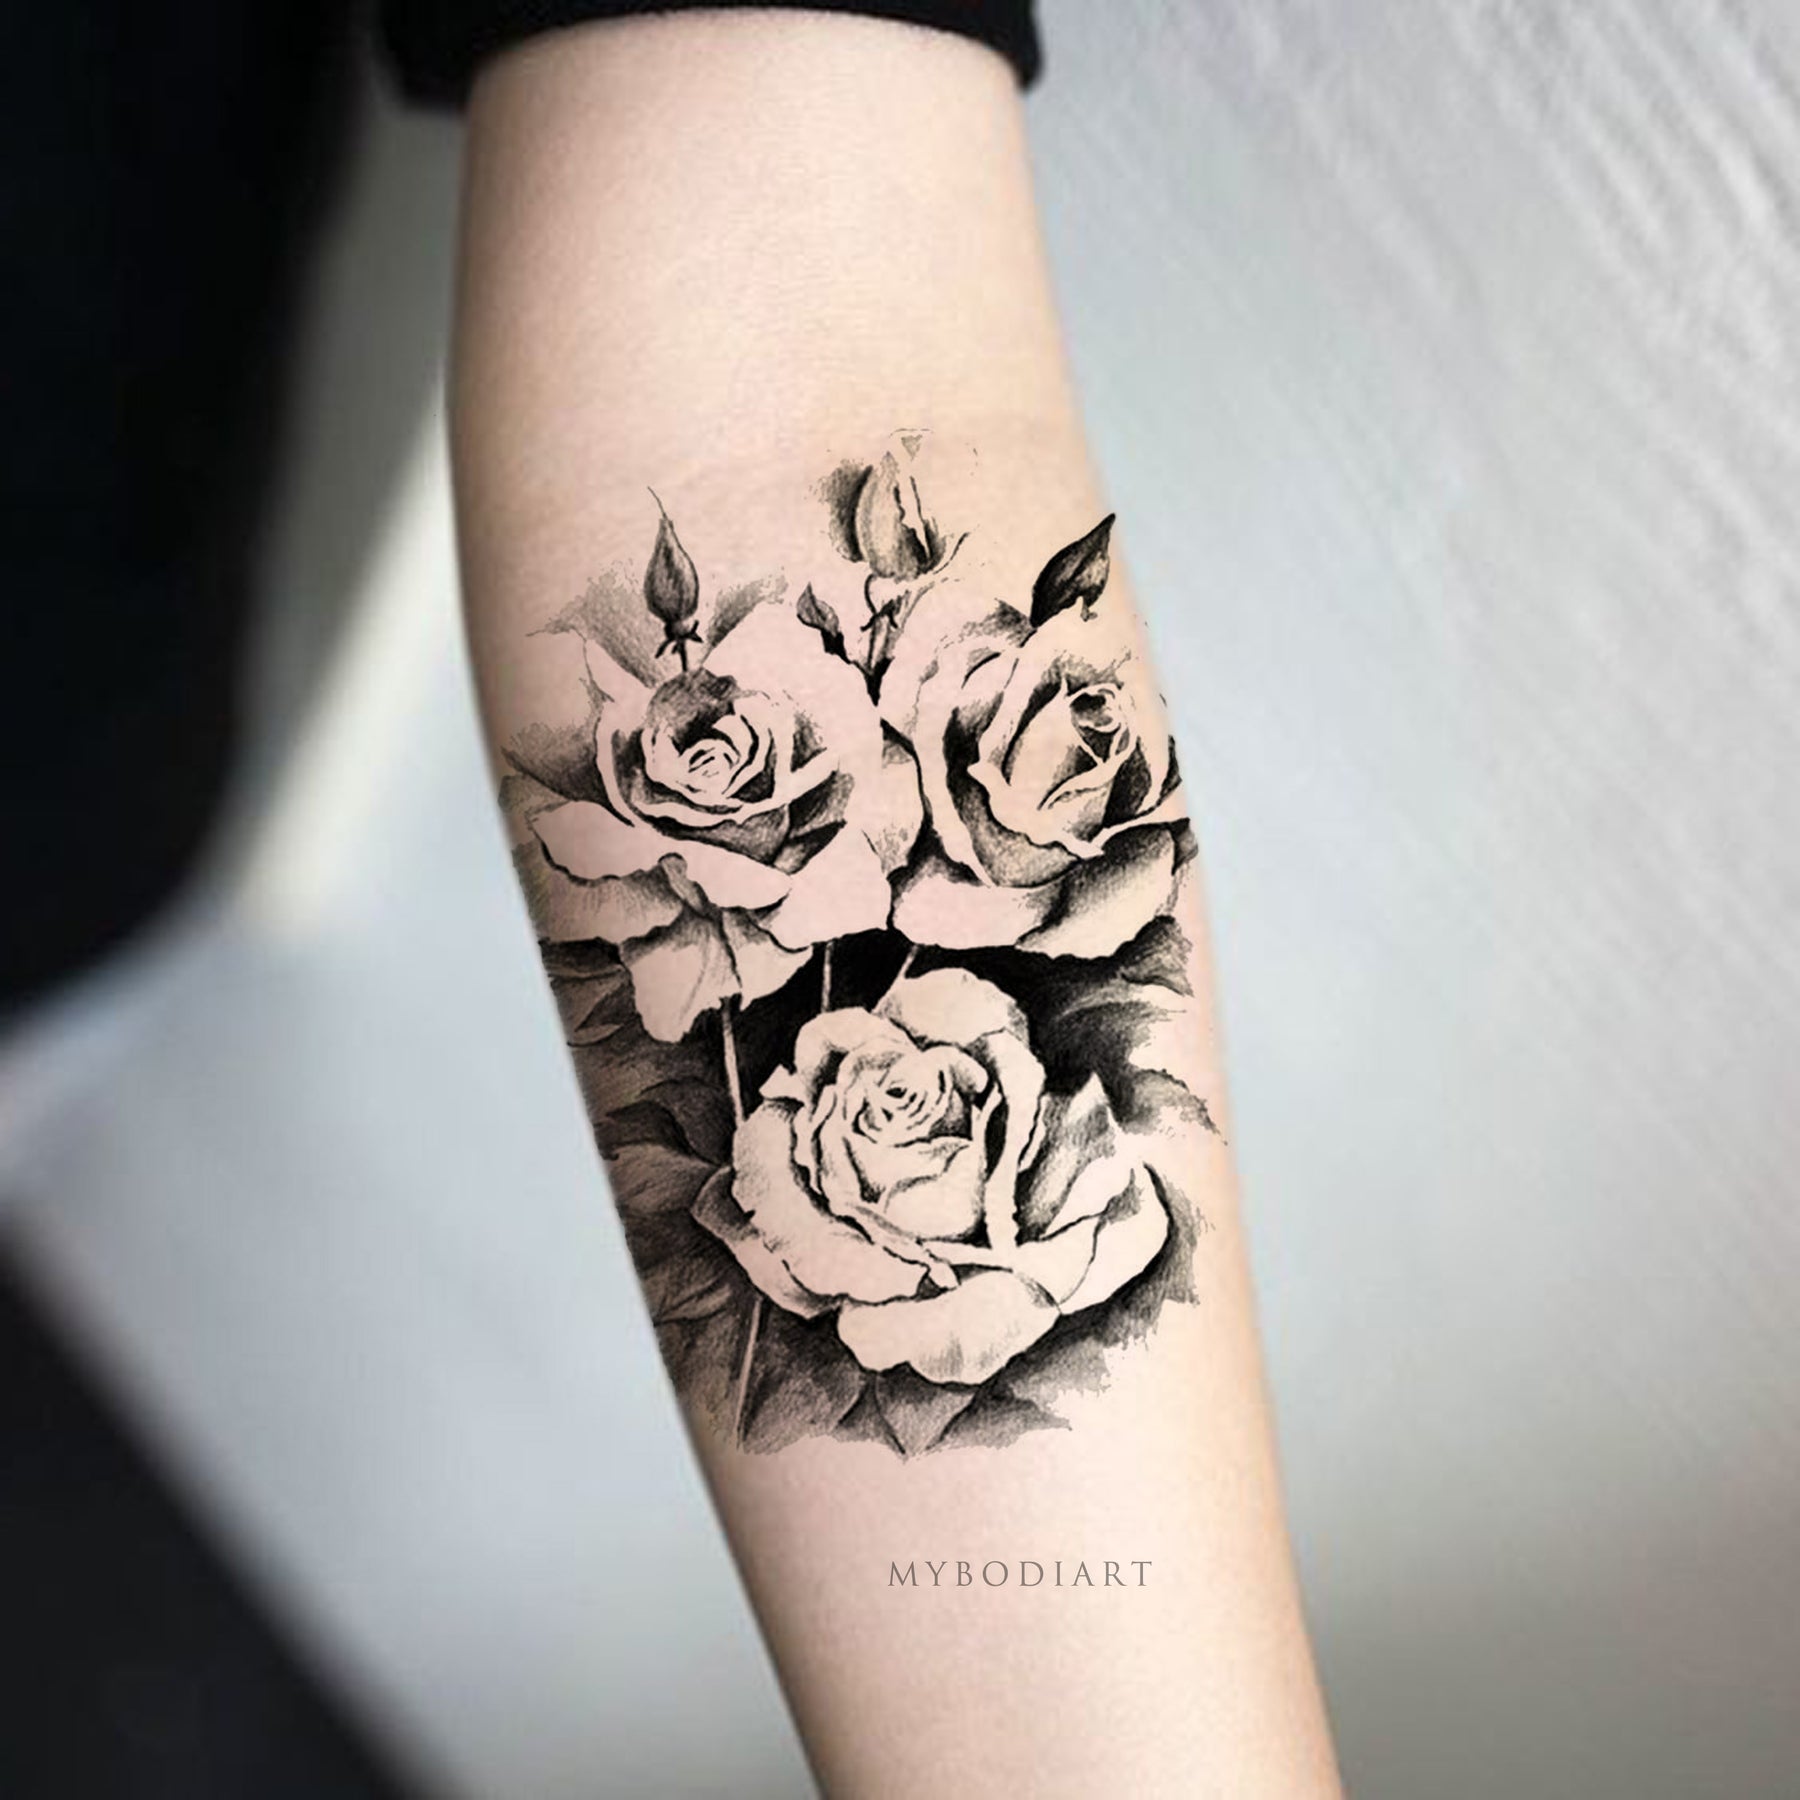 Sketchy black rose tattoo on the left forearm